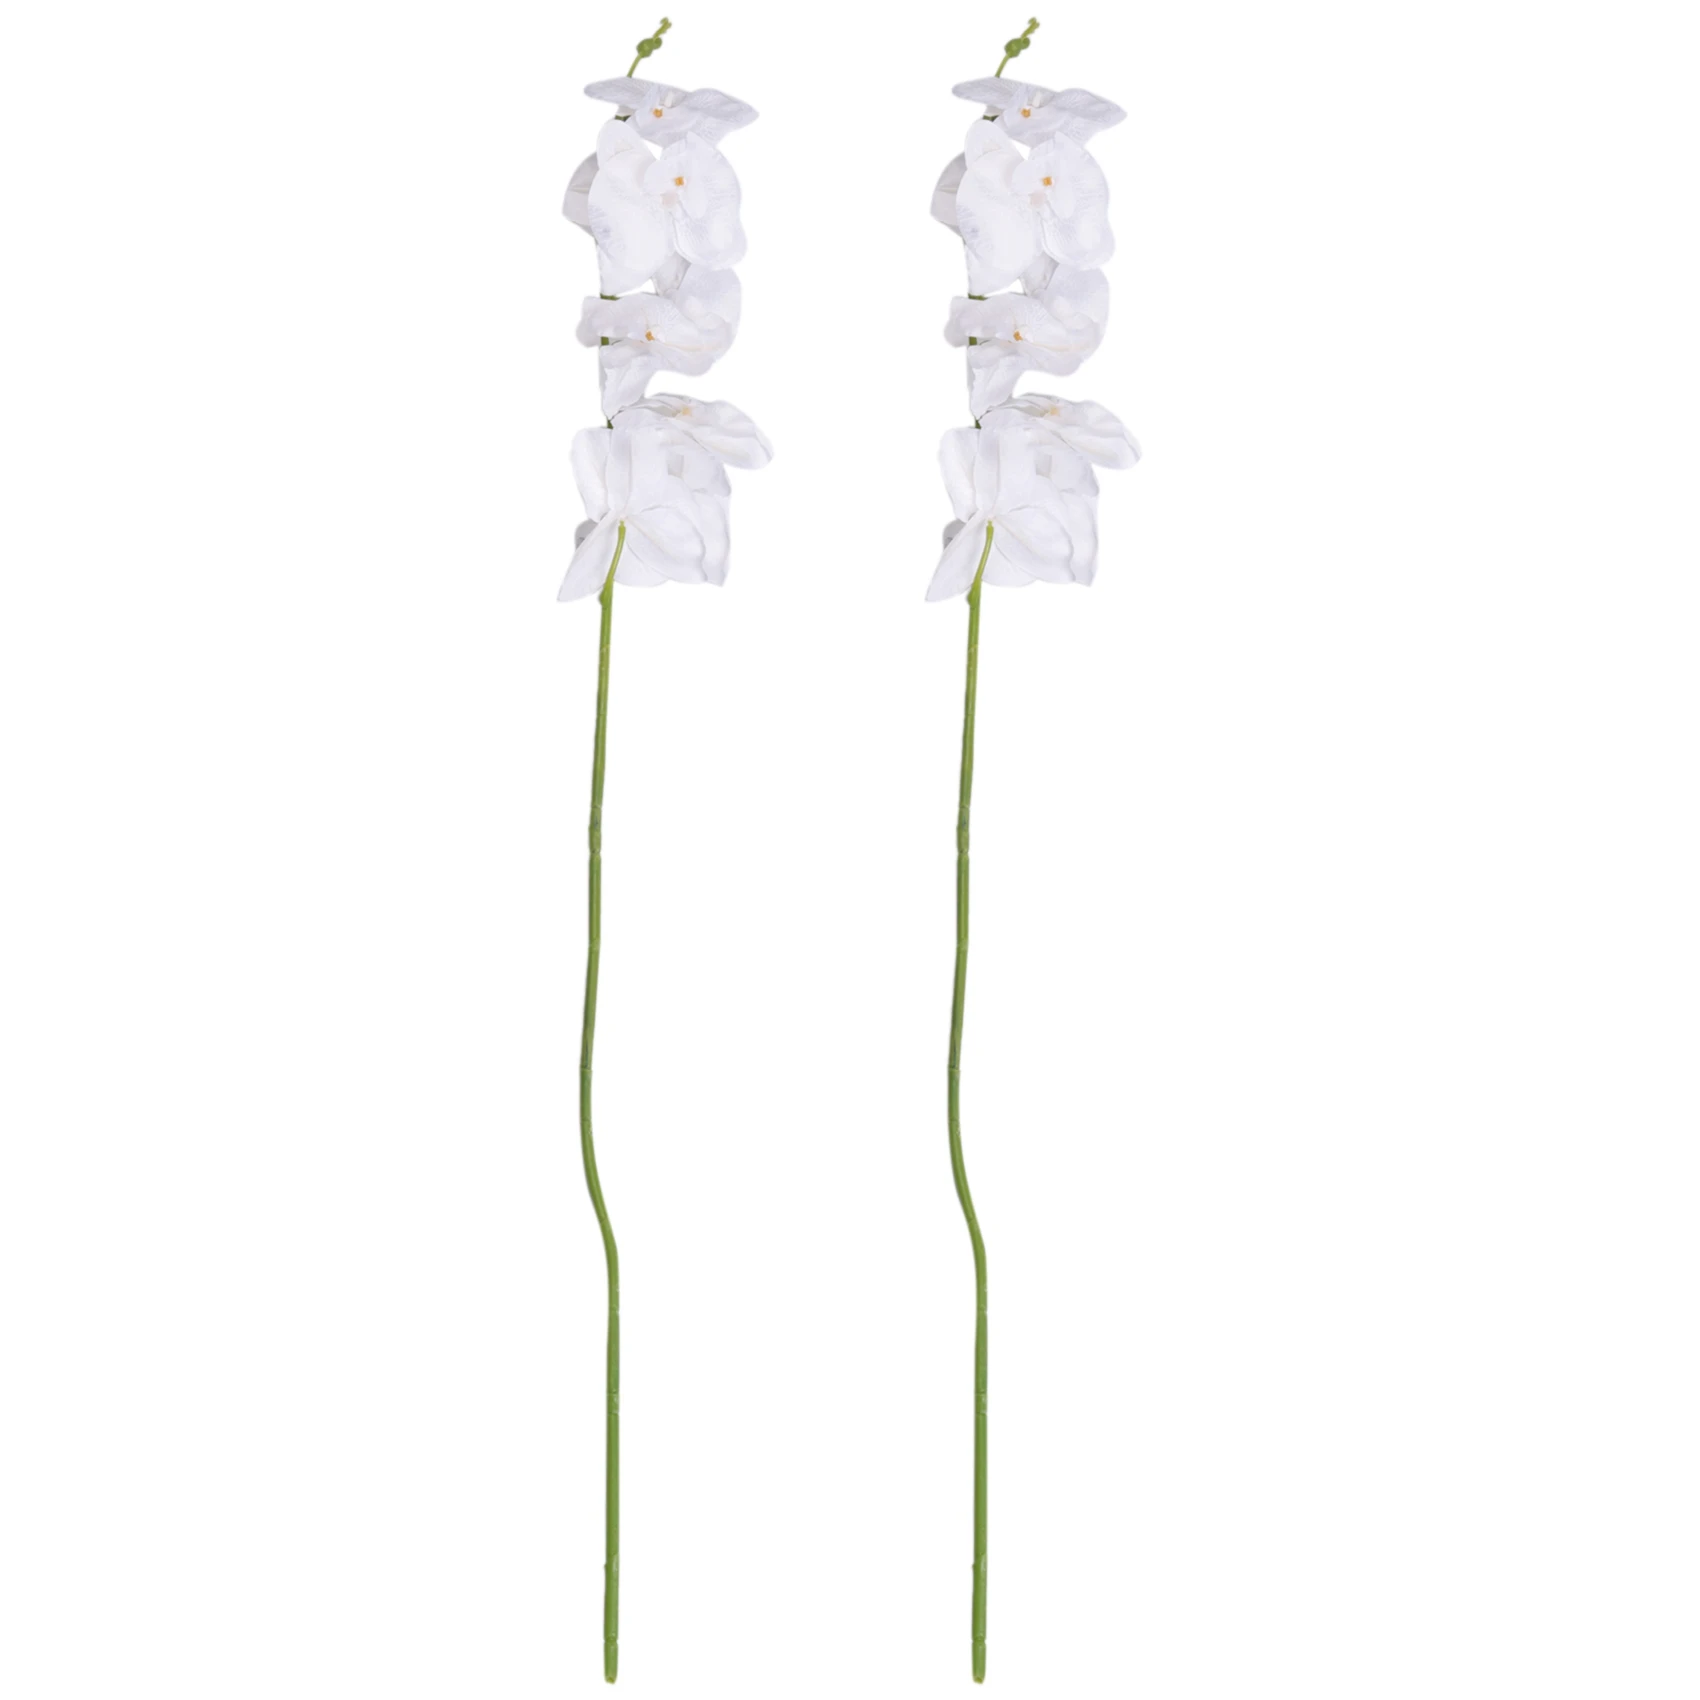 2Pcs 38inch Artificial Real Contact Orchids Flowers 9Heads Latex Phalaenopsis Stems for DIY Wedding Centerpieces,Kitchen